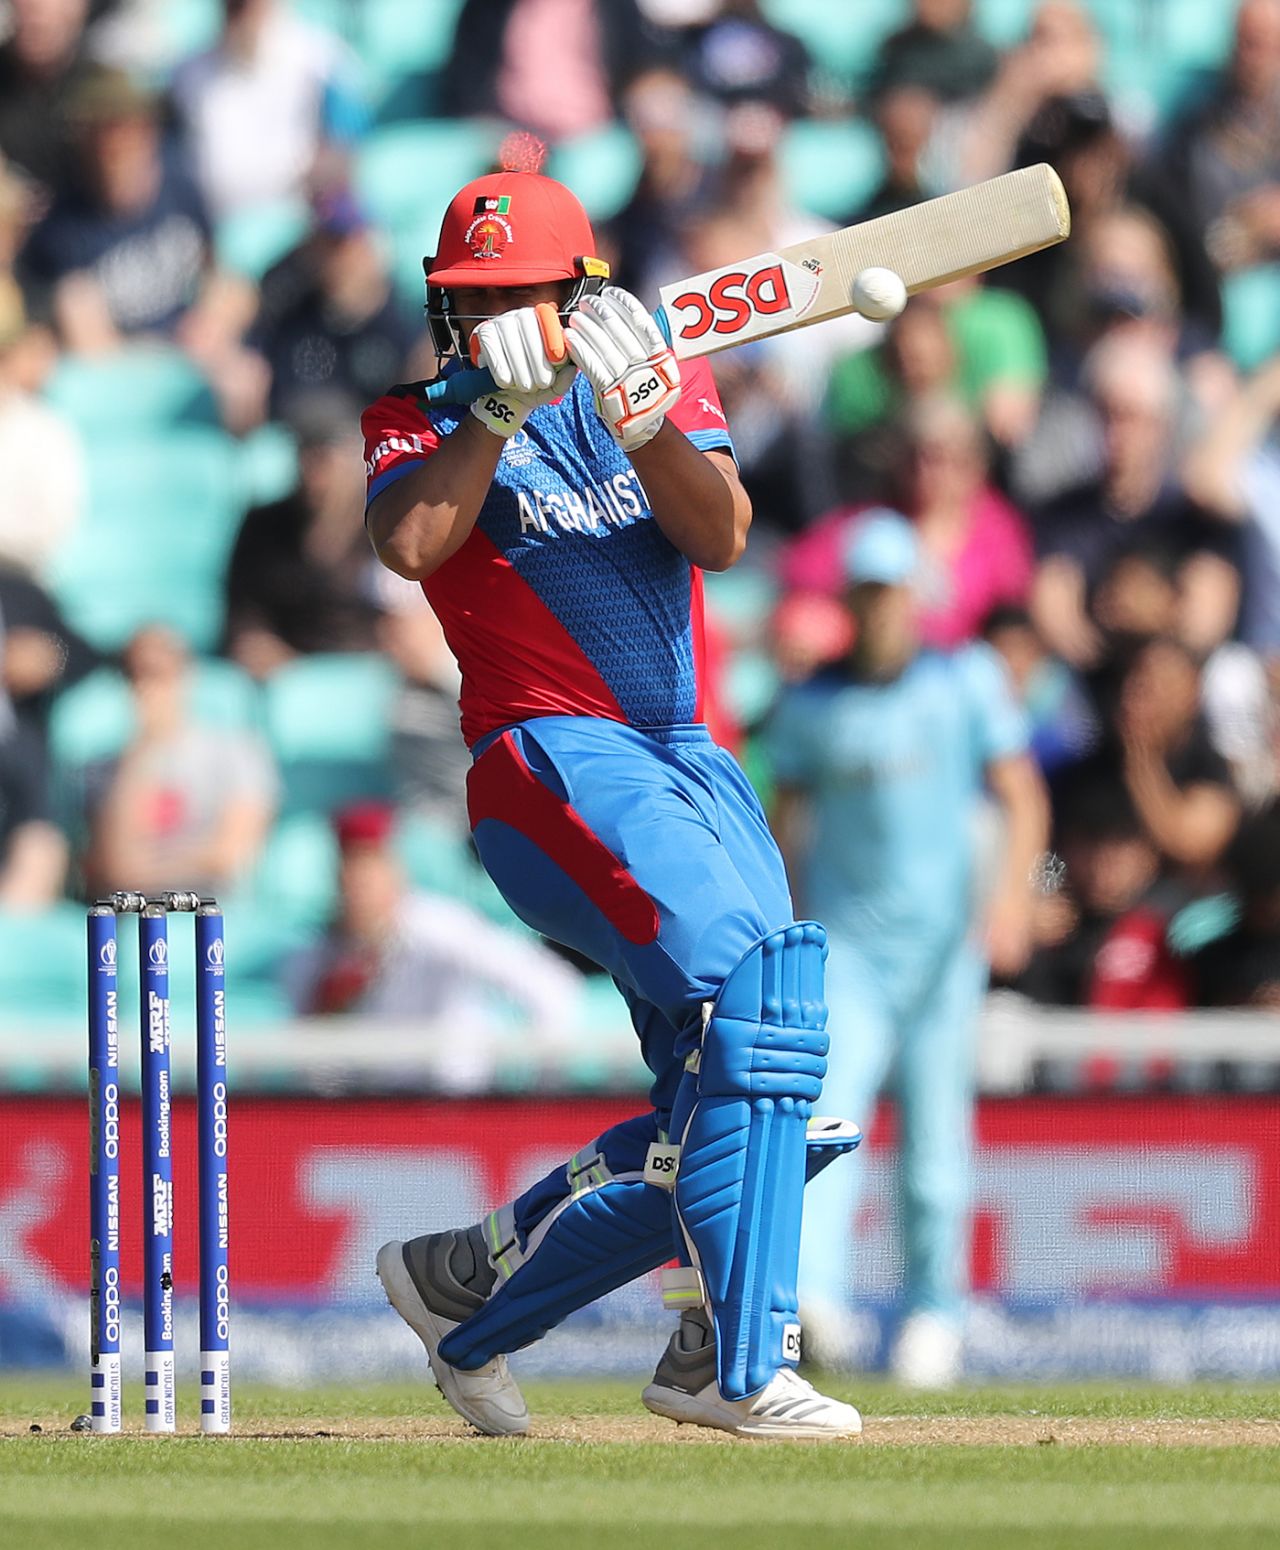 The Afghanistan batsmen were peppered with short balls early on, England v Afghanistan, World Cup 2019, warm-up, The Oval, May 27, 2019